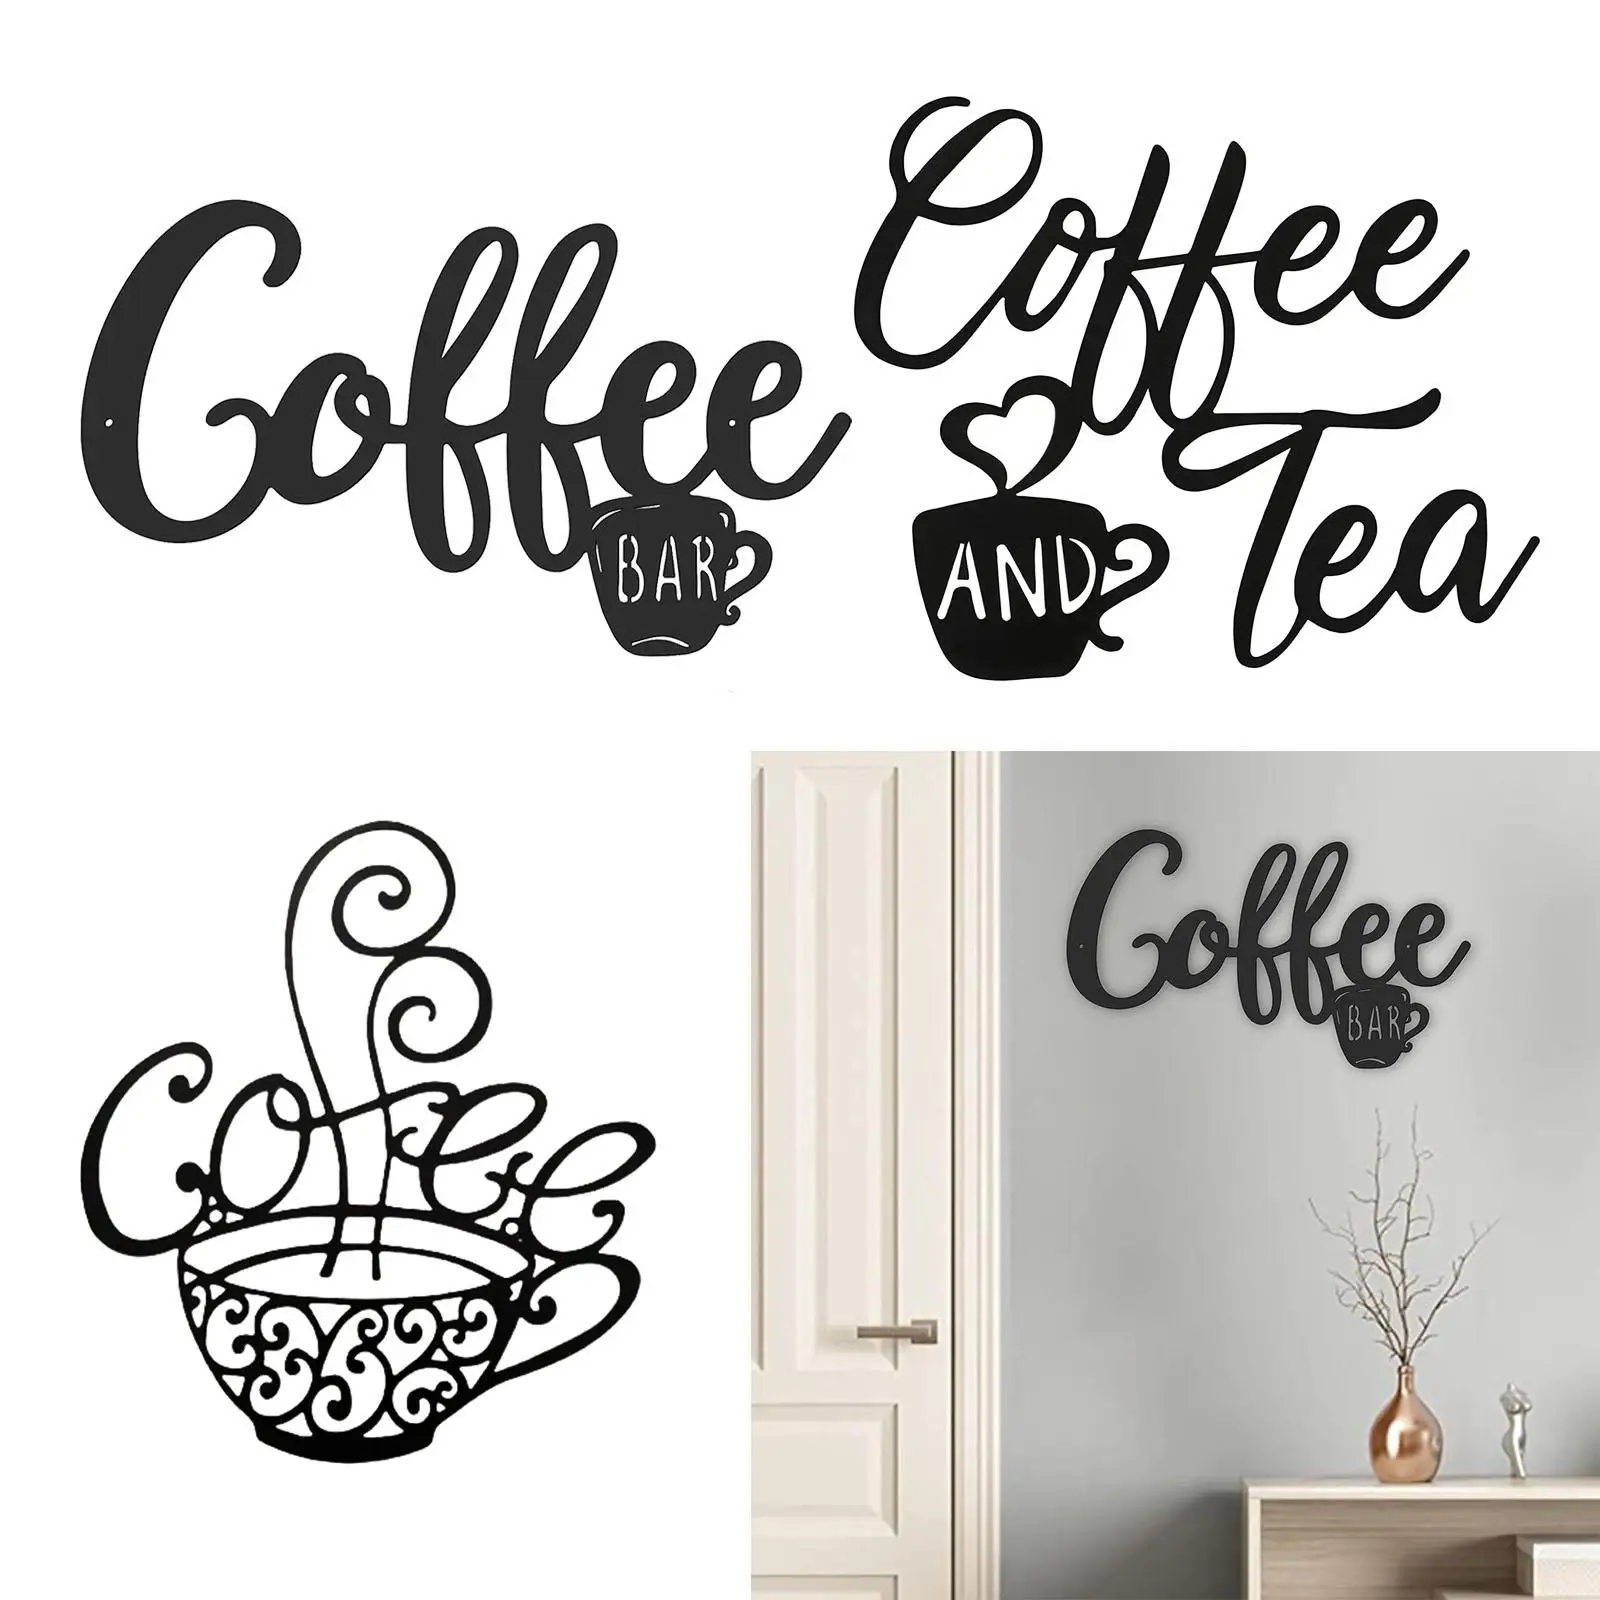 Coffee and Tea Bar Sign Plaque Metal Hanging for Farmhouse Kitchen Cafe